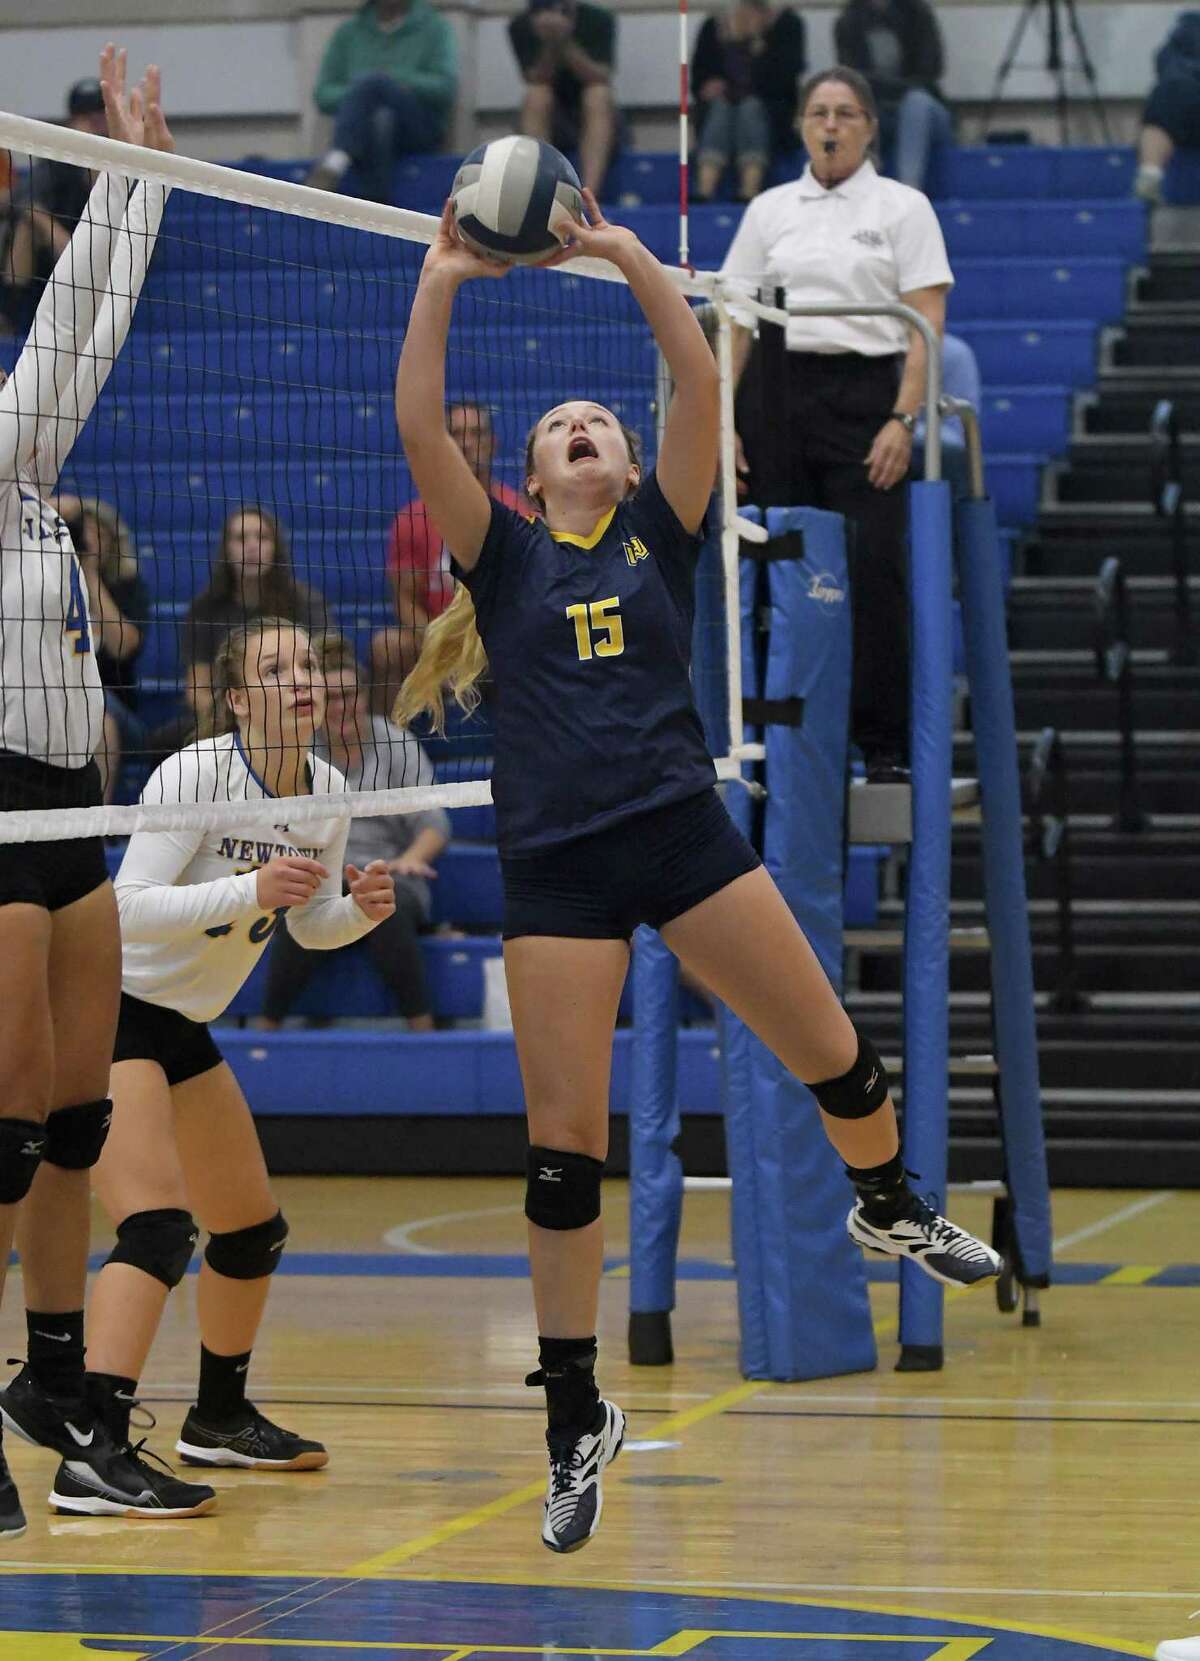 Woodstock Academy?’s Sammie Orlowski sets the ball during the Woodstock Academy at Newtown High School girls volleyball game, Sept. 17, 2018.